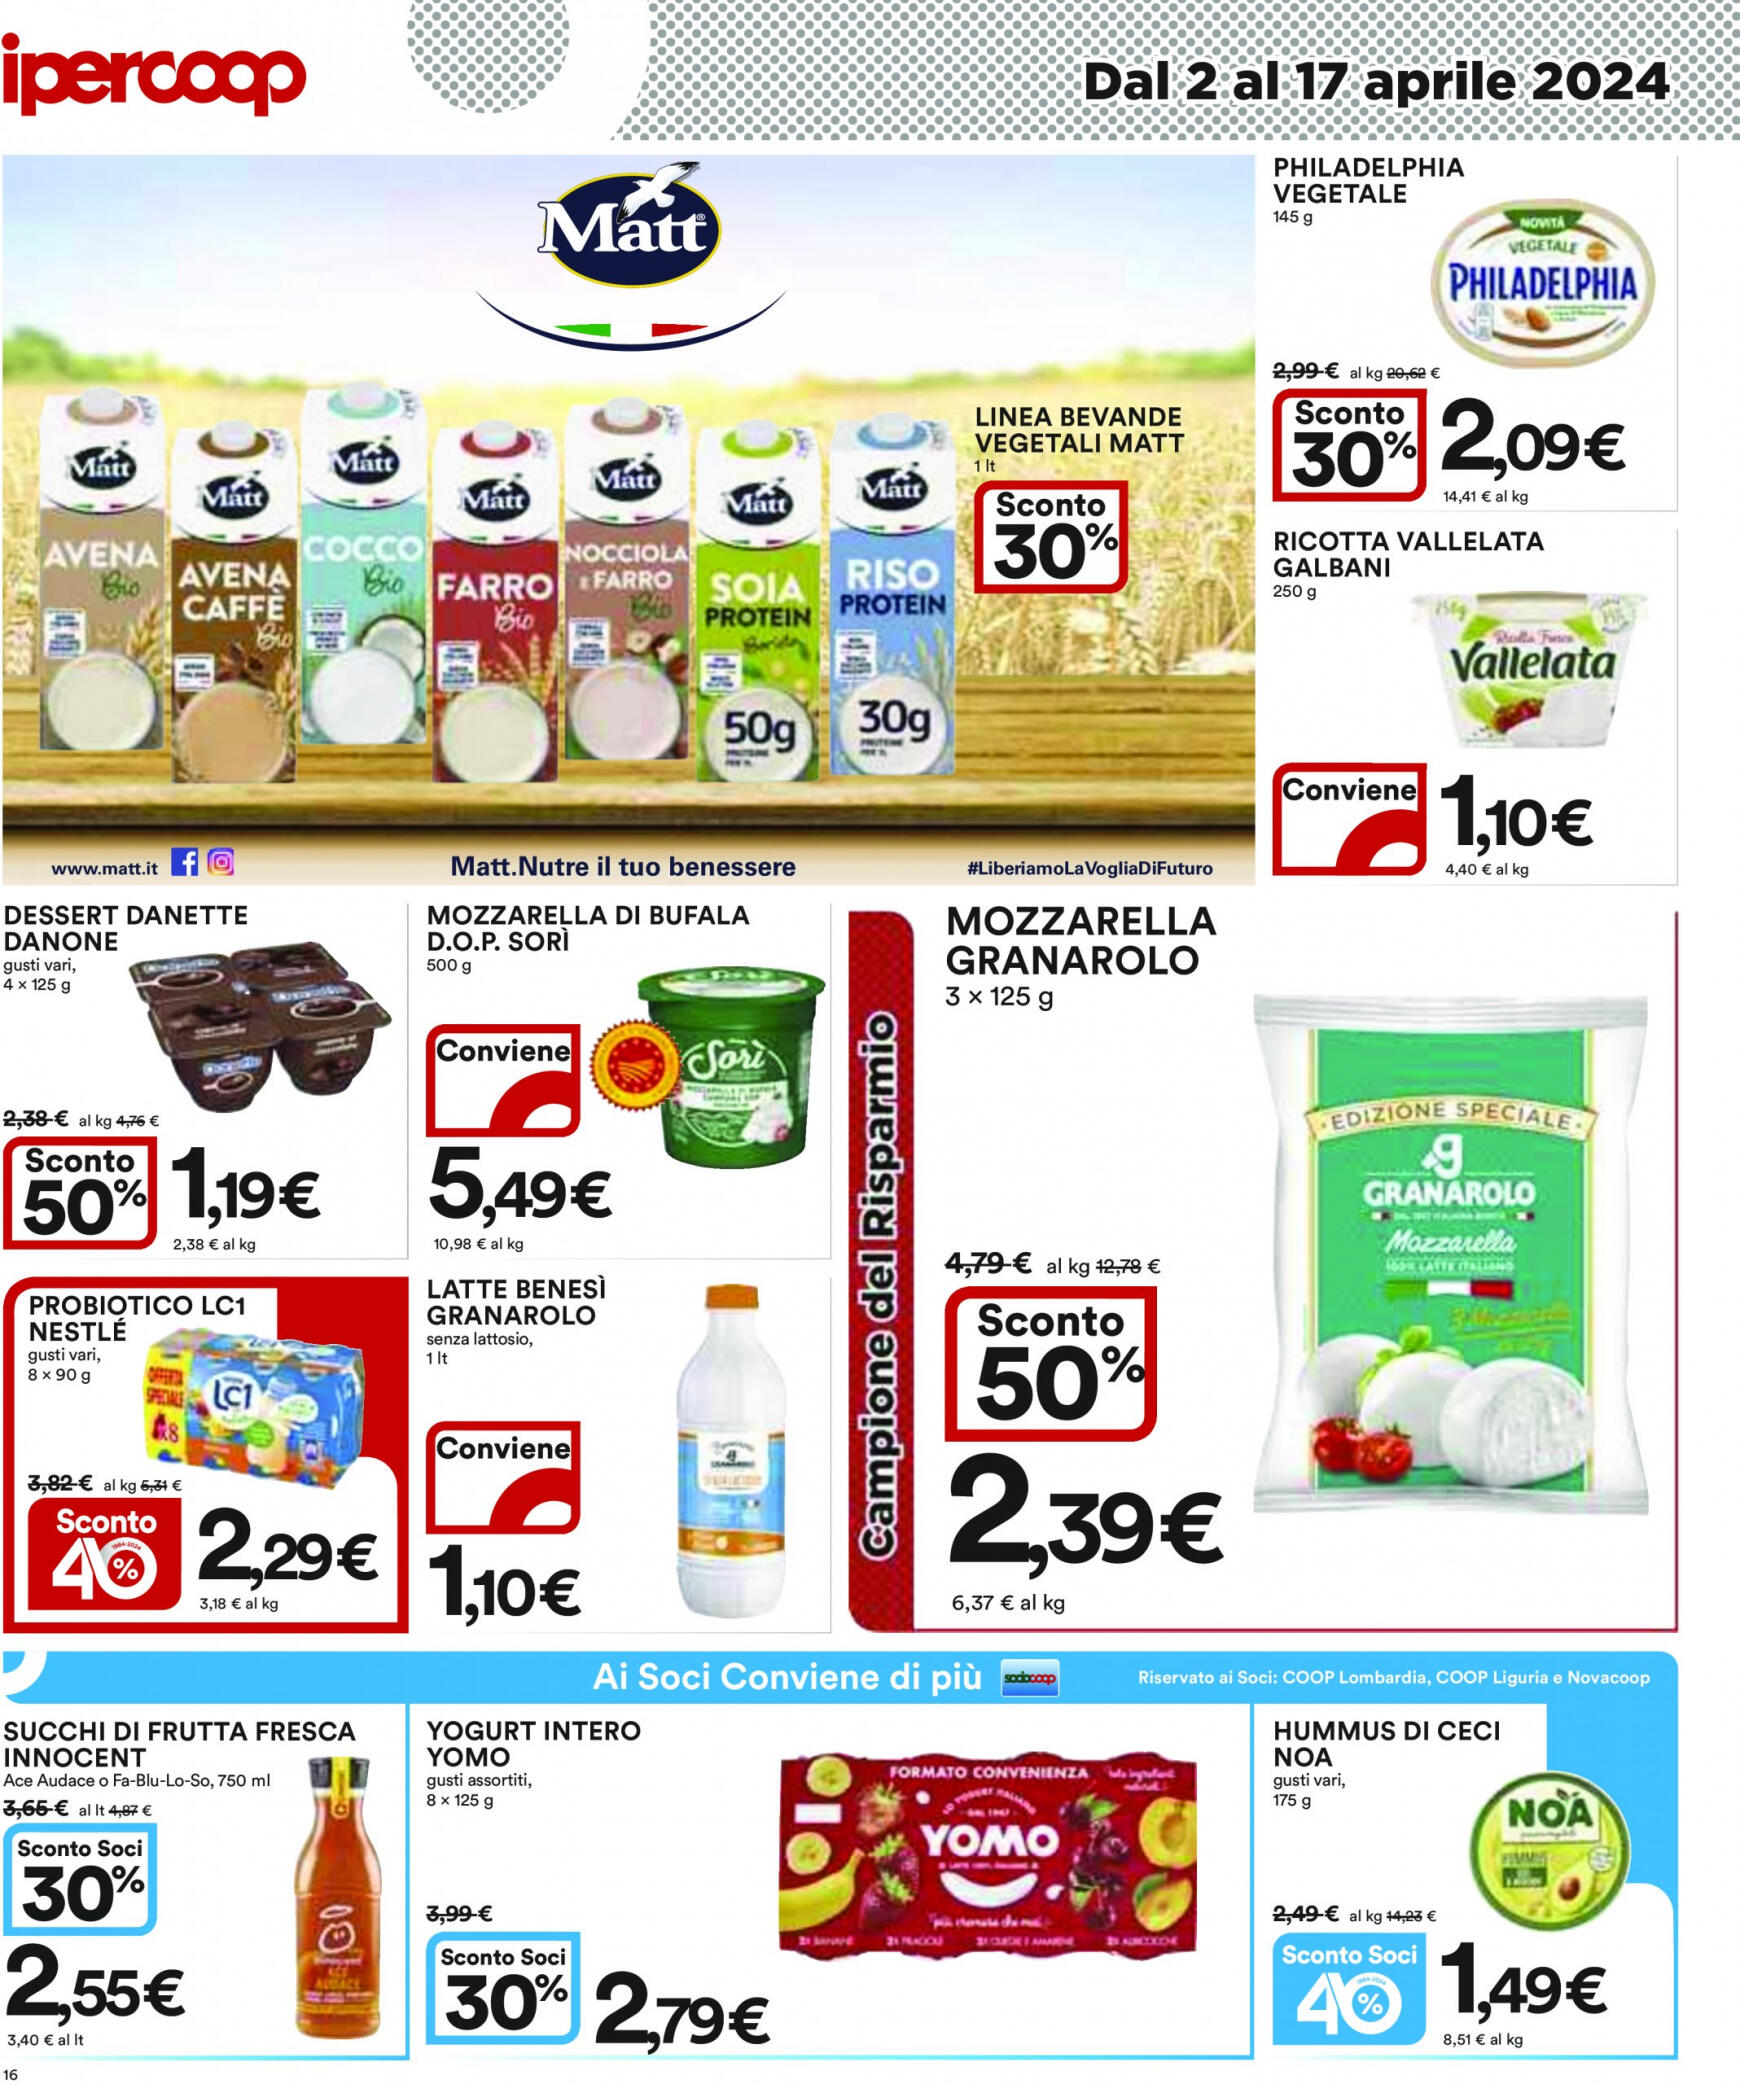 coop - Nuovo volantino Coop 02.04. - 17.04. - page: 16